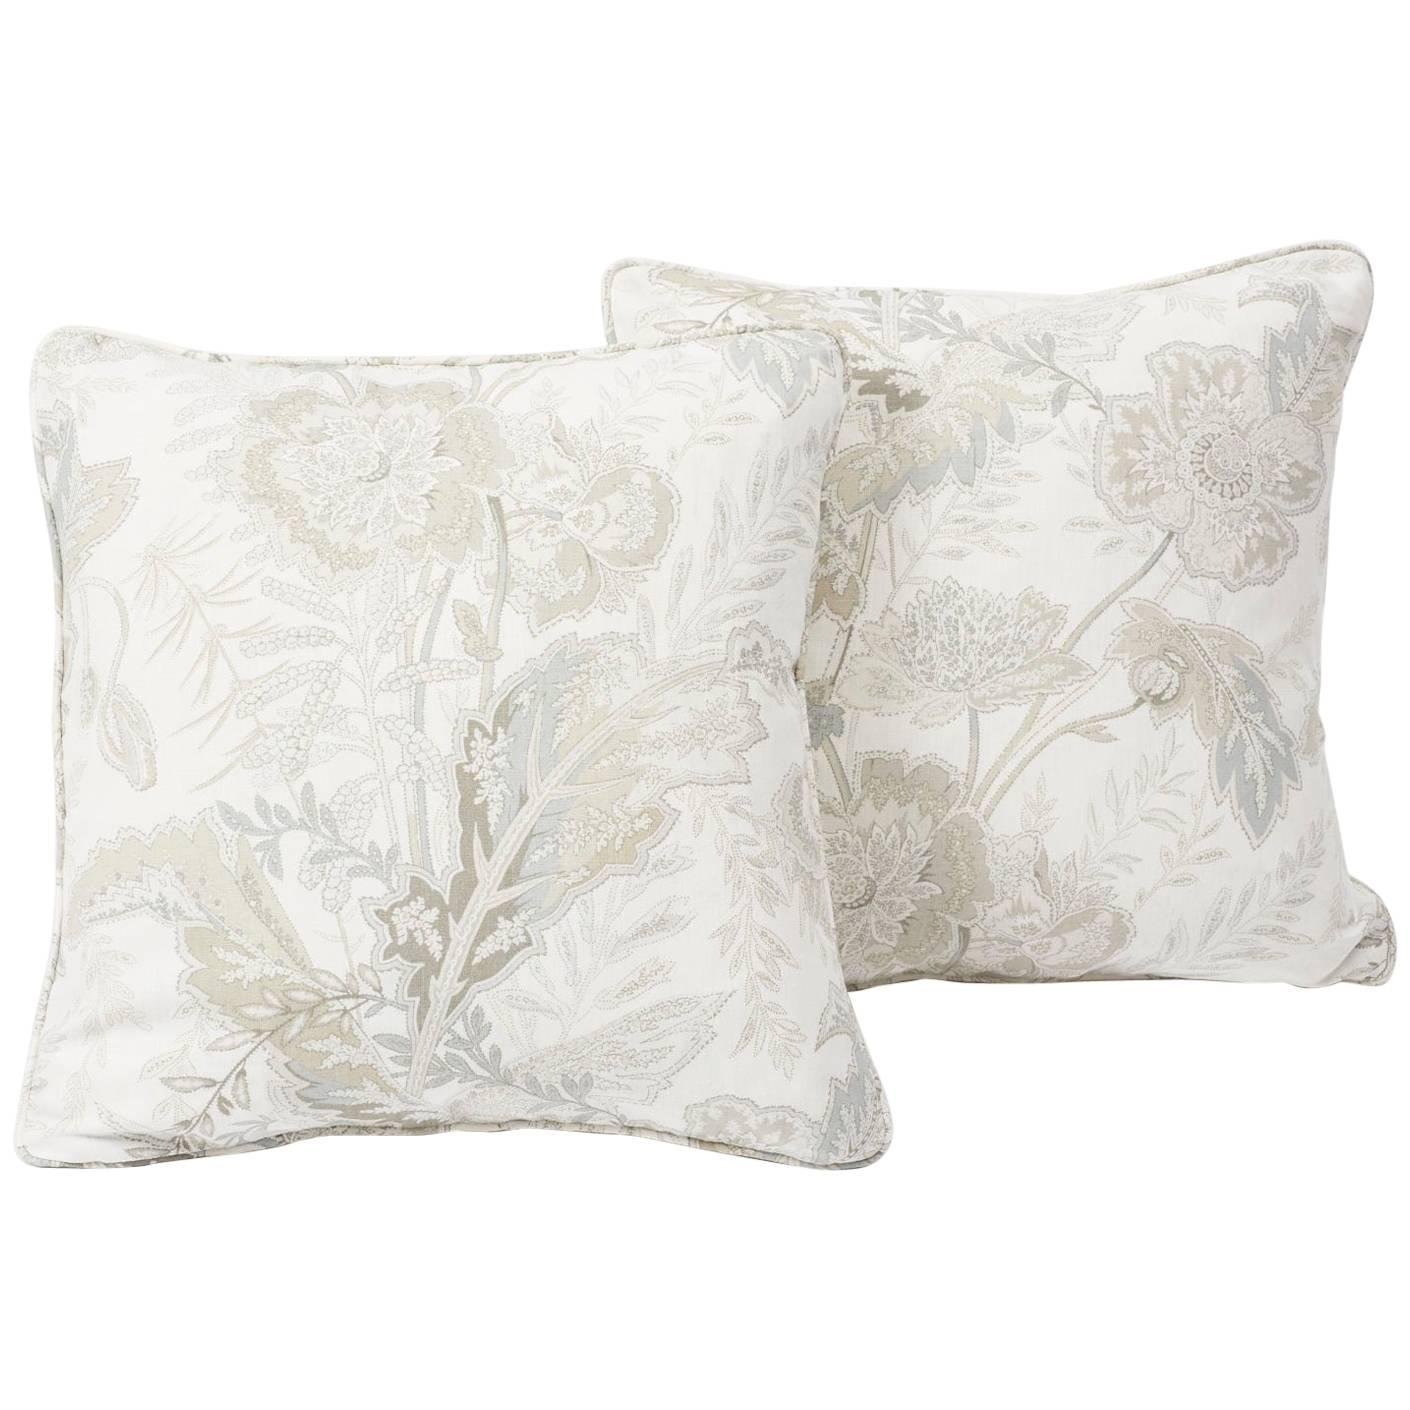 Contemporary Schumacher Sandoway Vine French Floral Motif White Two-Sided Linen Pillow